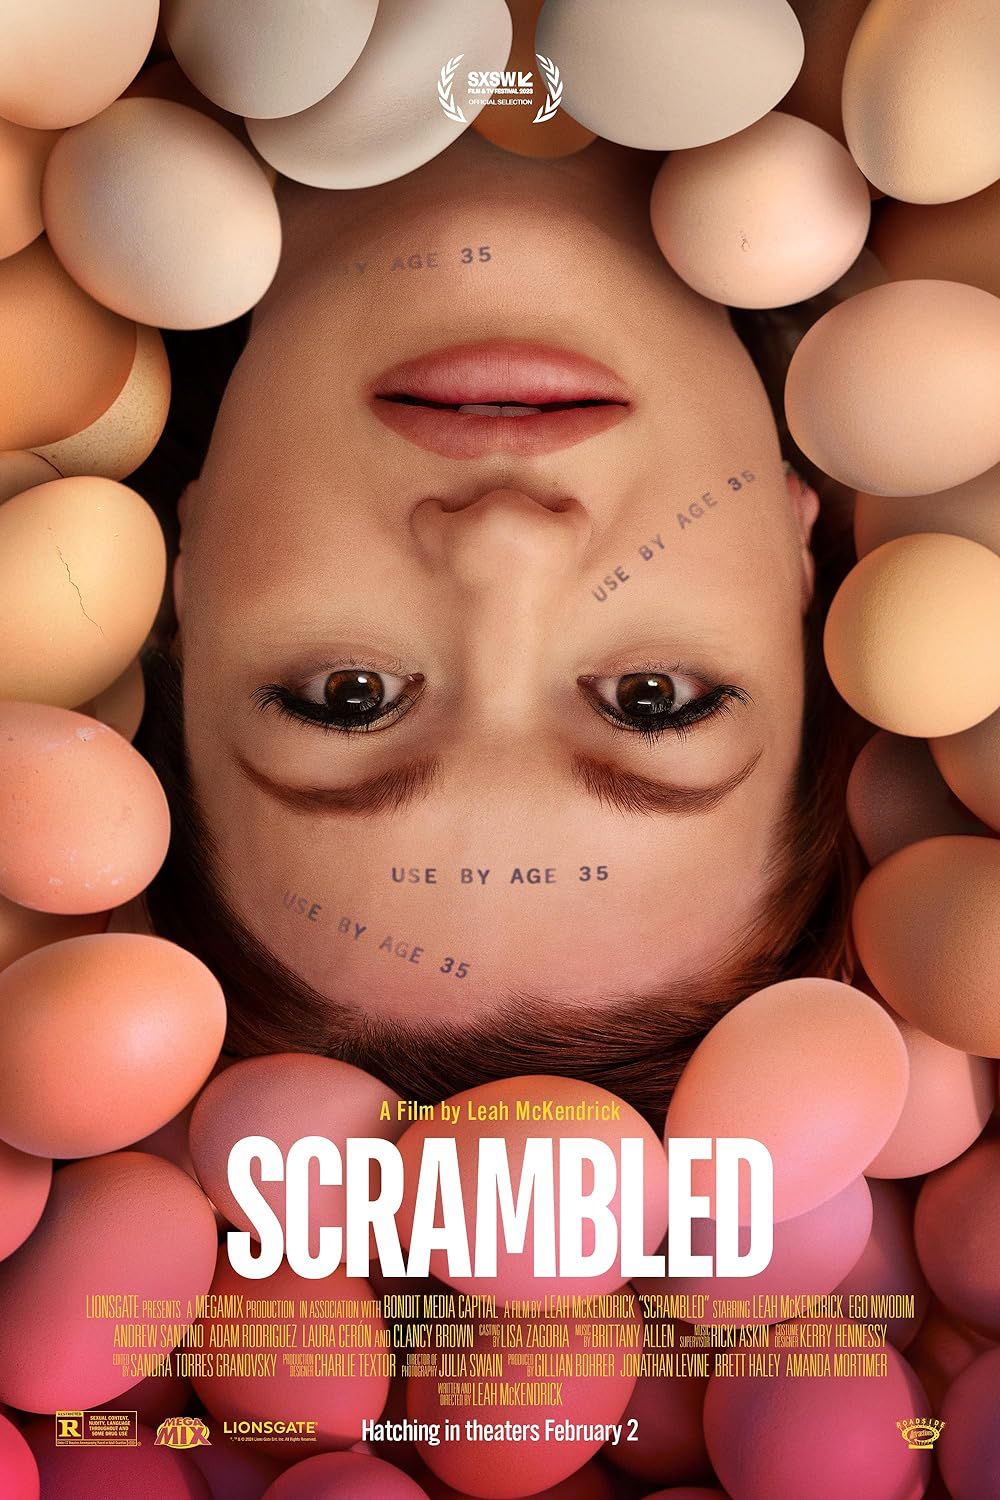 Scrambled Review: A Funny, Light & Heartfelt Exploration Of A Woman’s Coming Of Age